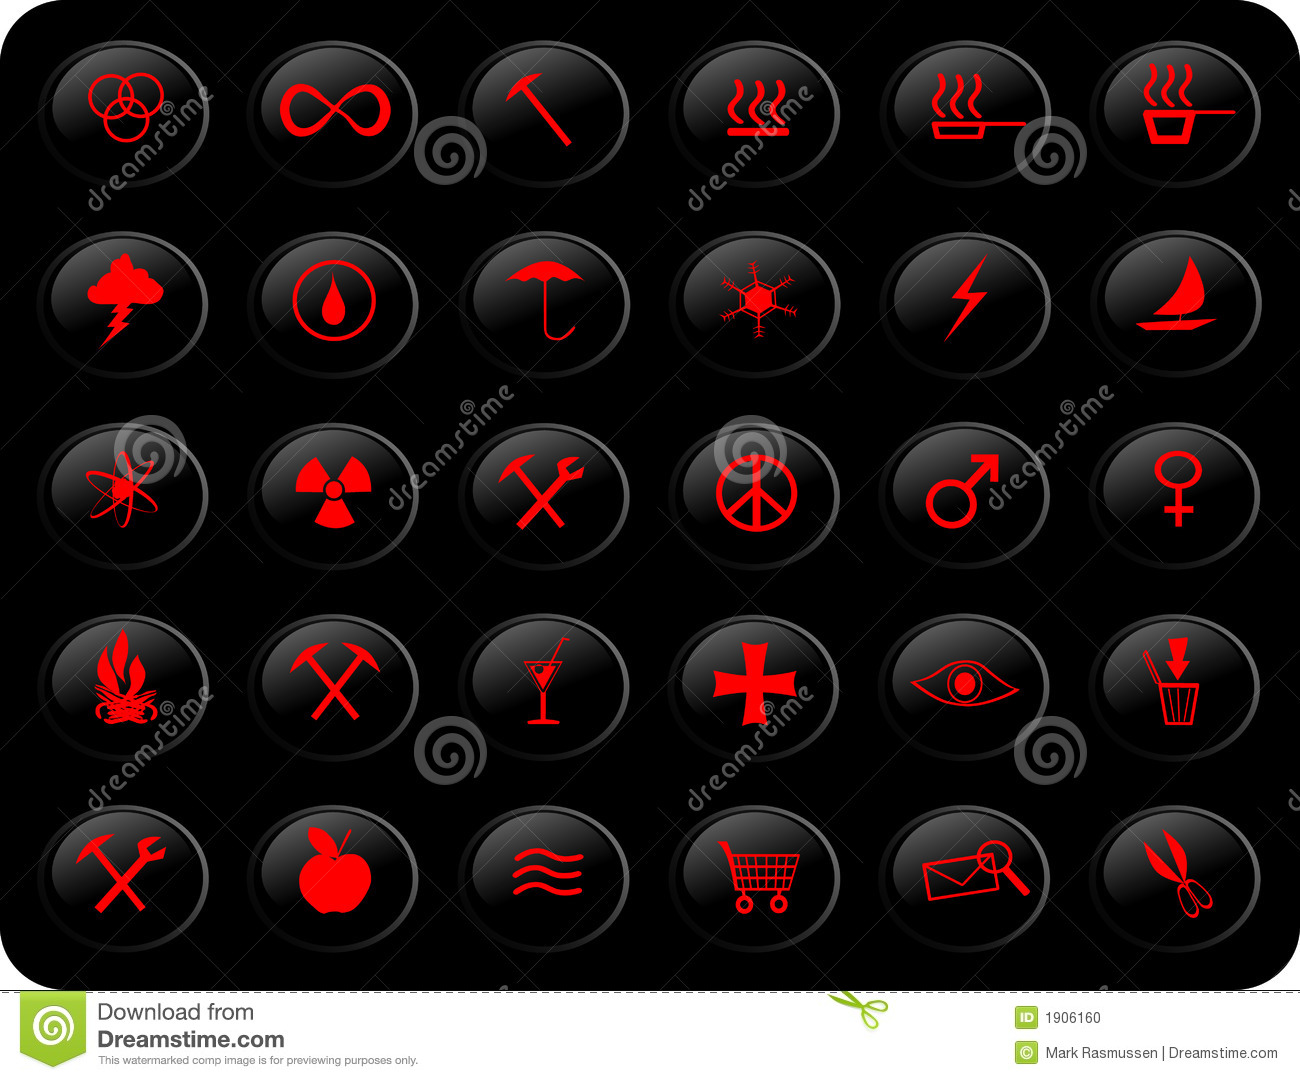 Black and Red Buttons